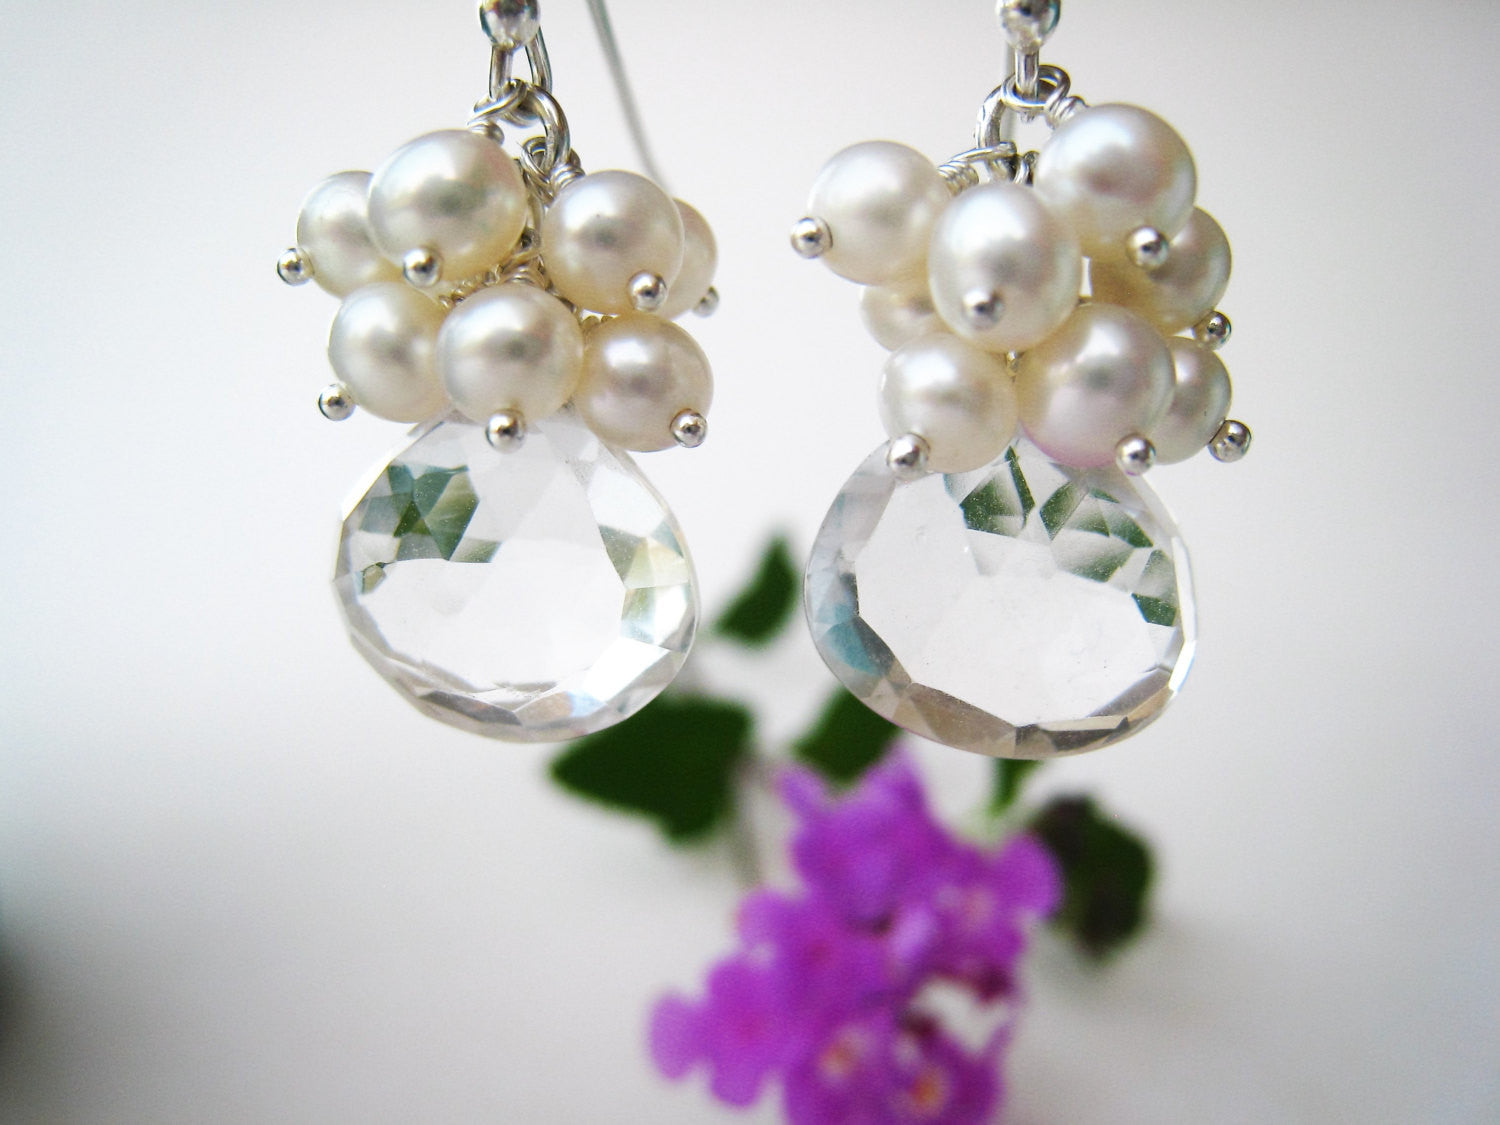 Rock Crystal Quartz and Pearl Cluster Earrings - Sienna Grace Jewelry | Pretty Little Handcrafted Sparkles